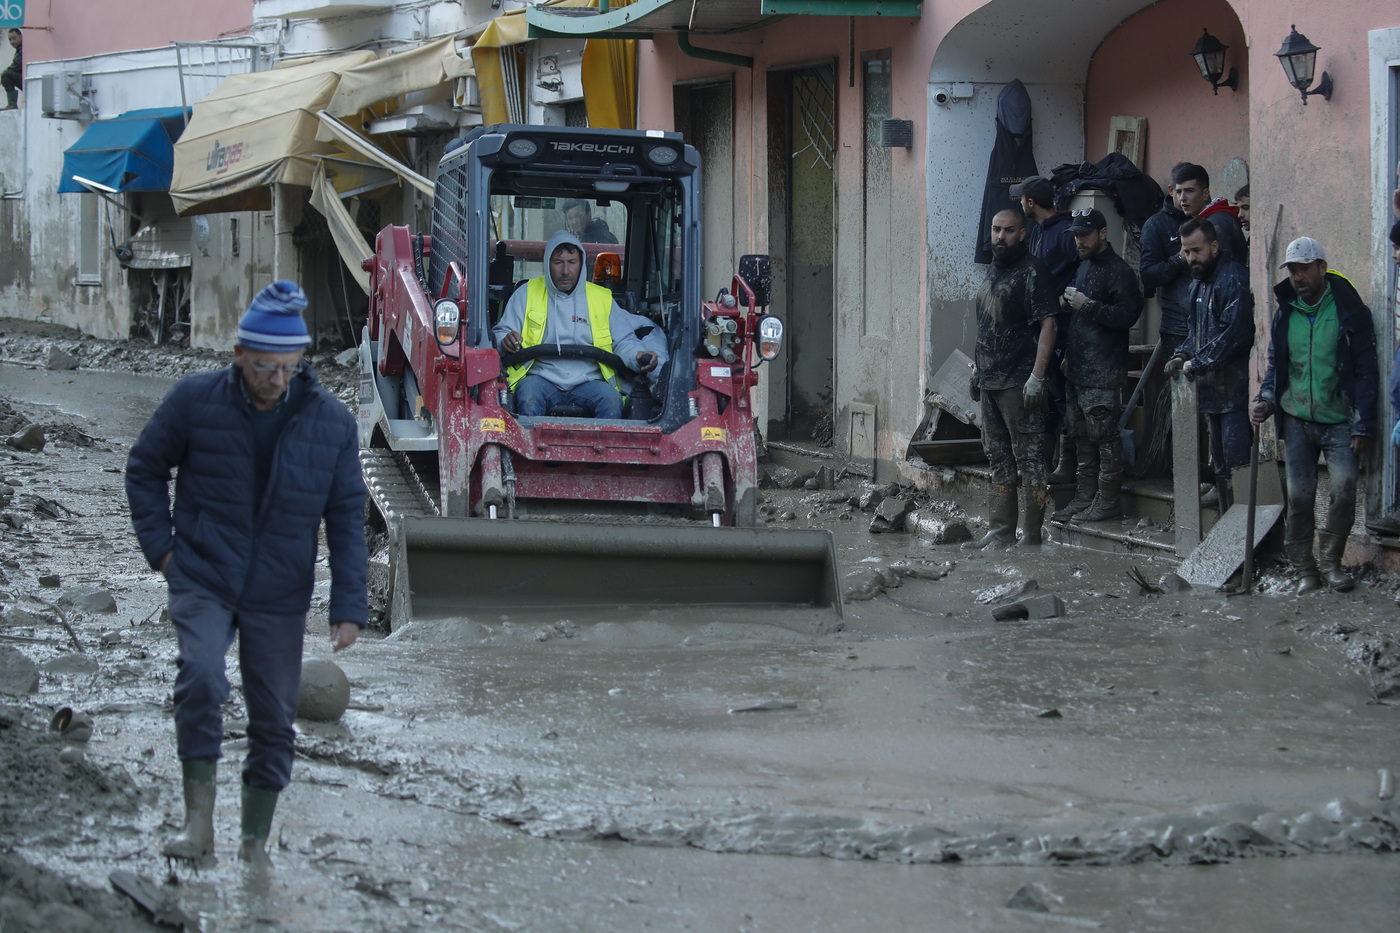 Workers clear mud and debris from a street after heavy rainfall triggered landslides that collapsed buildings and left as many as 12 people missing, in Casamicciola, on the southern Italian island of Ischia, Sunday, Nov. 27, 2022. Authorities said that the landslide that early Saturday destroyed buildings and swept parked cars into the sea left one person dead and 12 missing. (AP Photo/Salvatore Laporta)